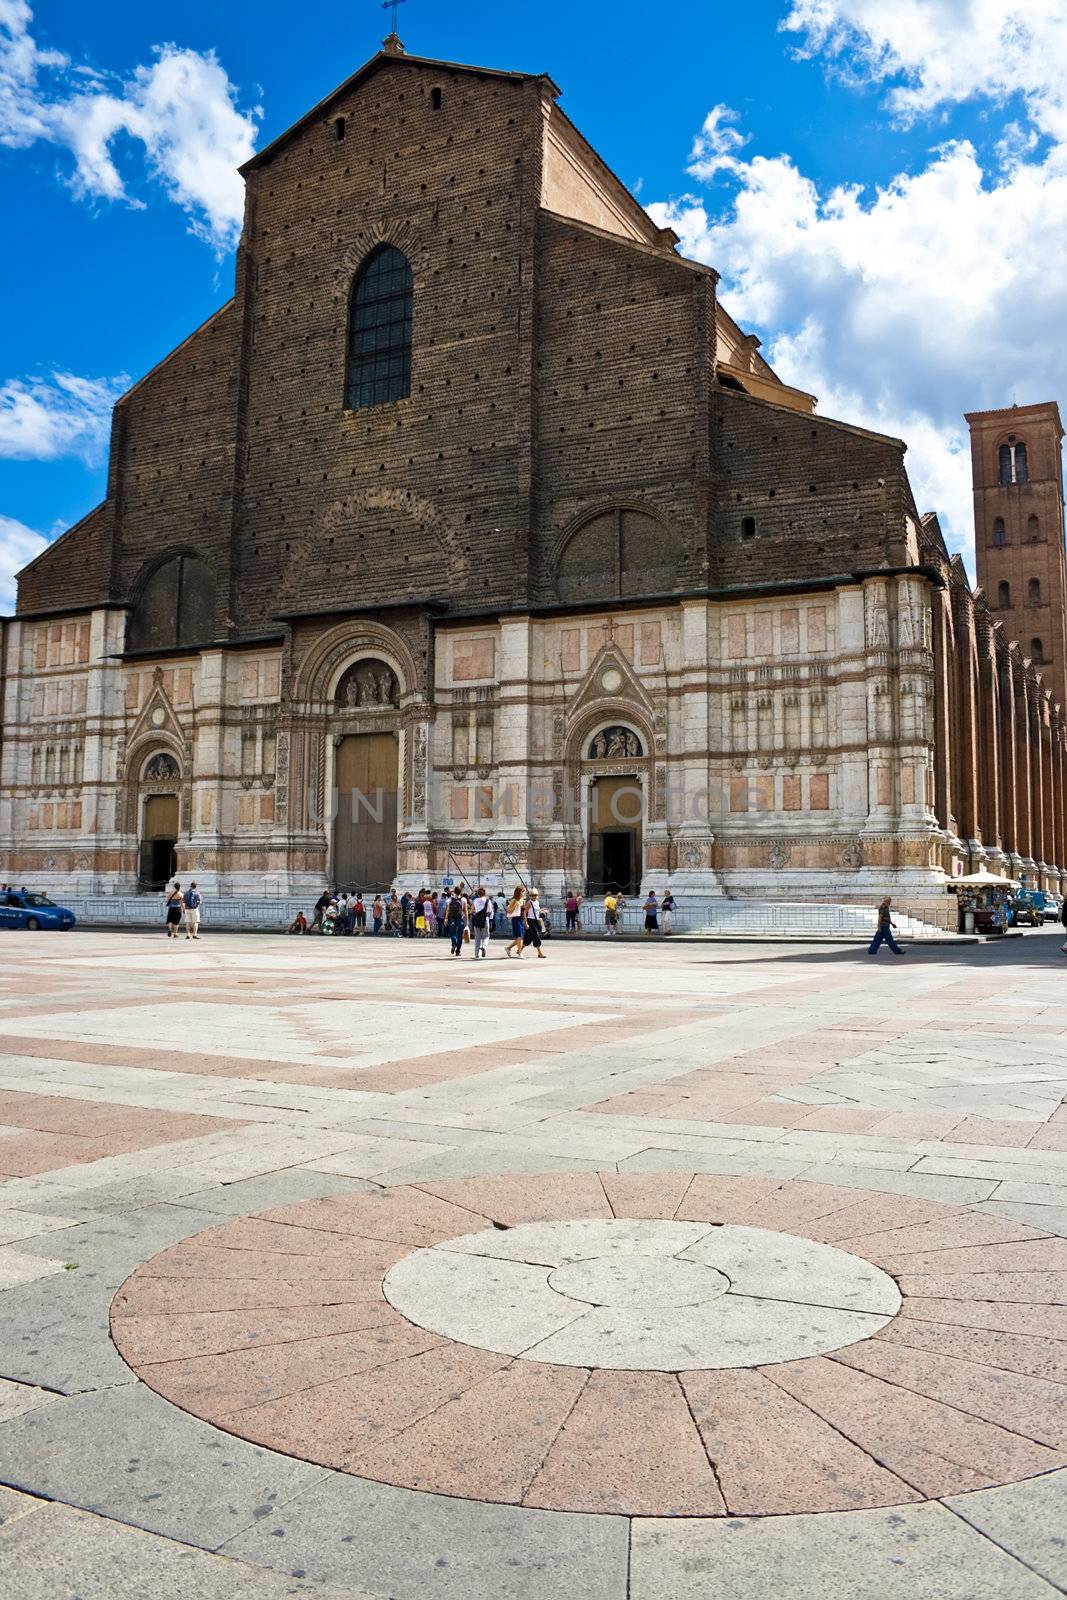 Basilica di San Petronio - huge and beautiful cathedral in Bologna, Italy